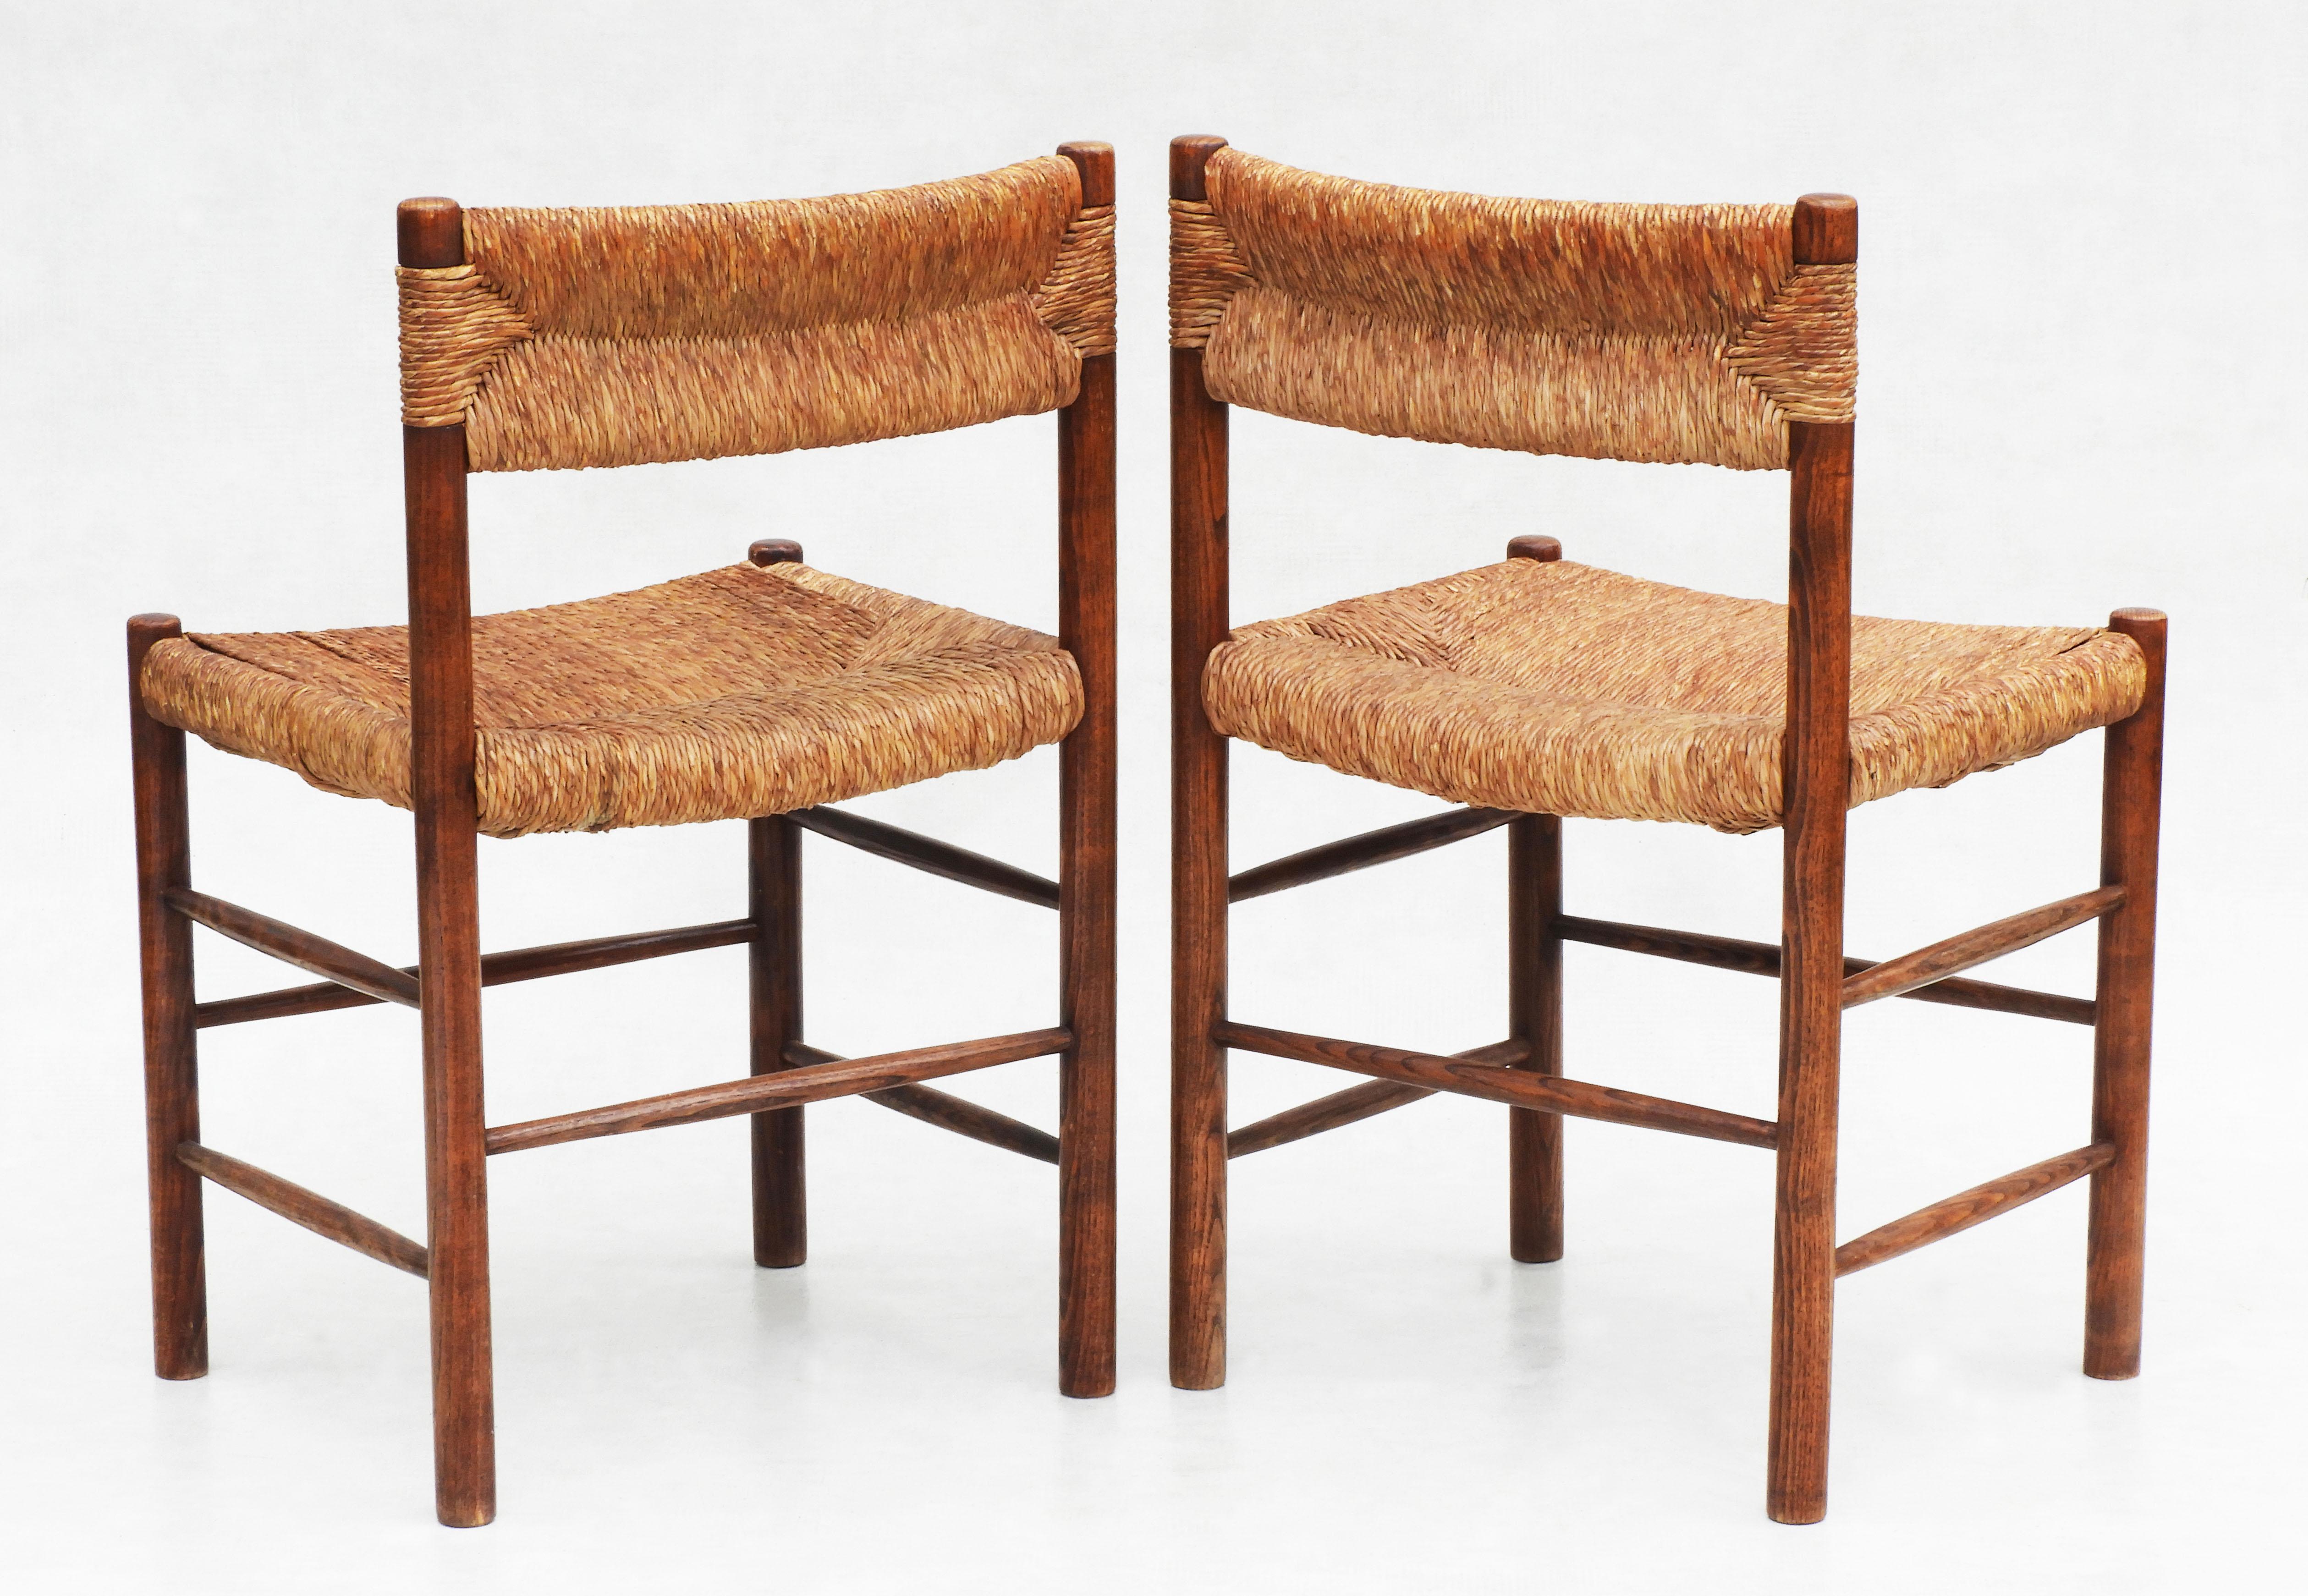 Hand-Crafted Pair of Dordogne Chairs by Charlotte Perriande for Robert Sentou France, 1960s